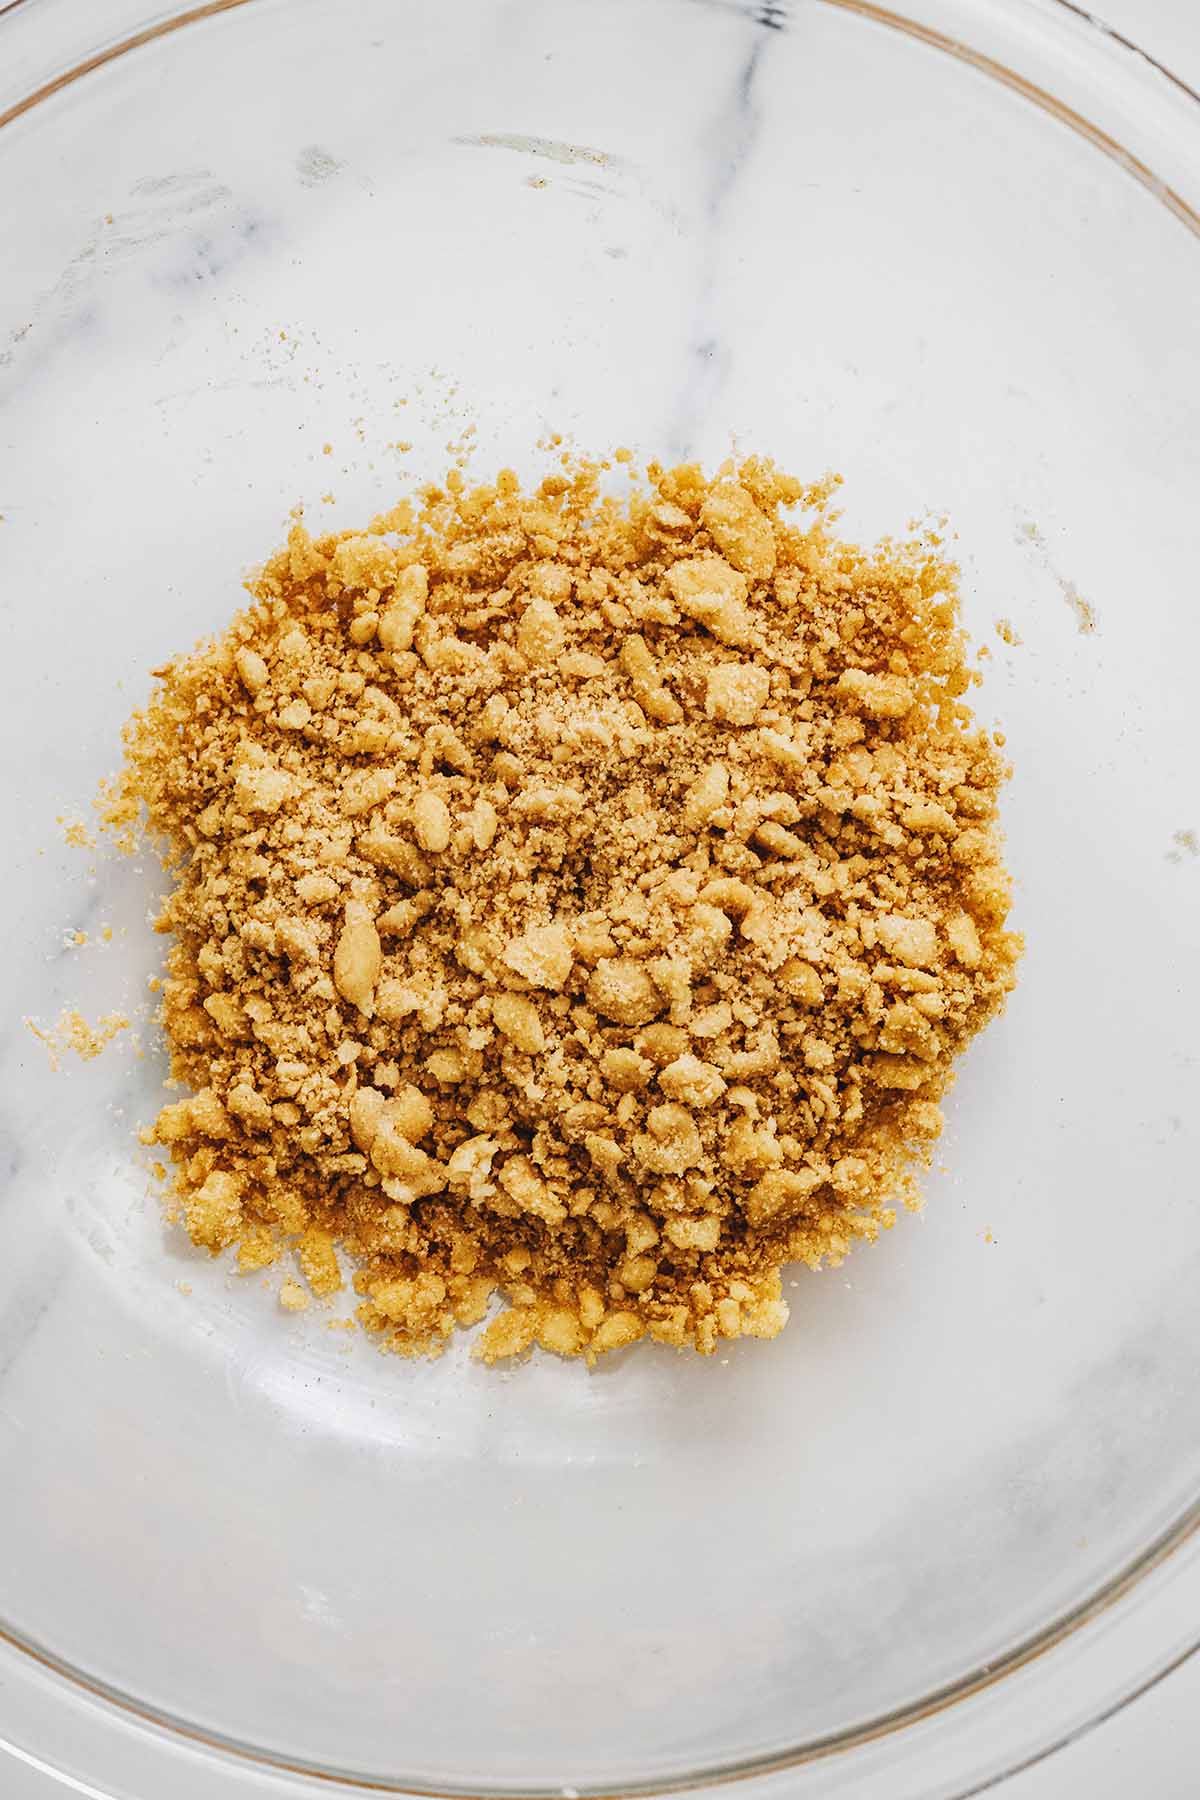 Ginger crumb topping mixture in a glass bowl